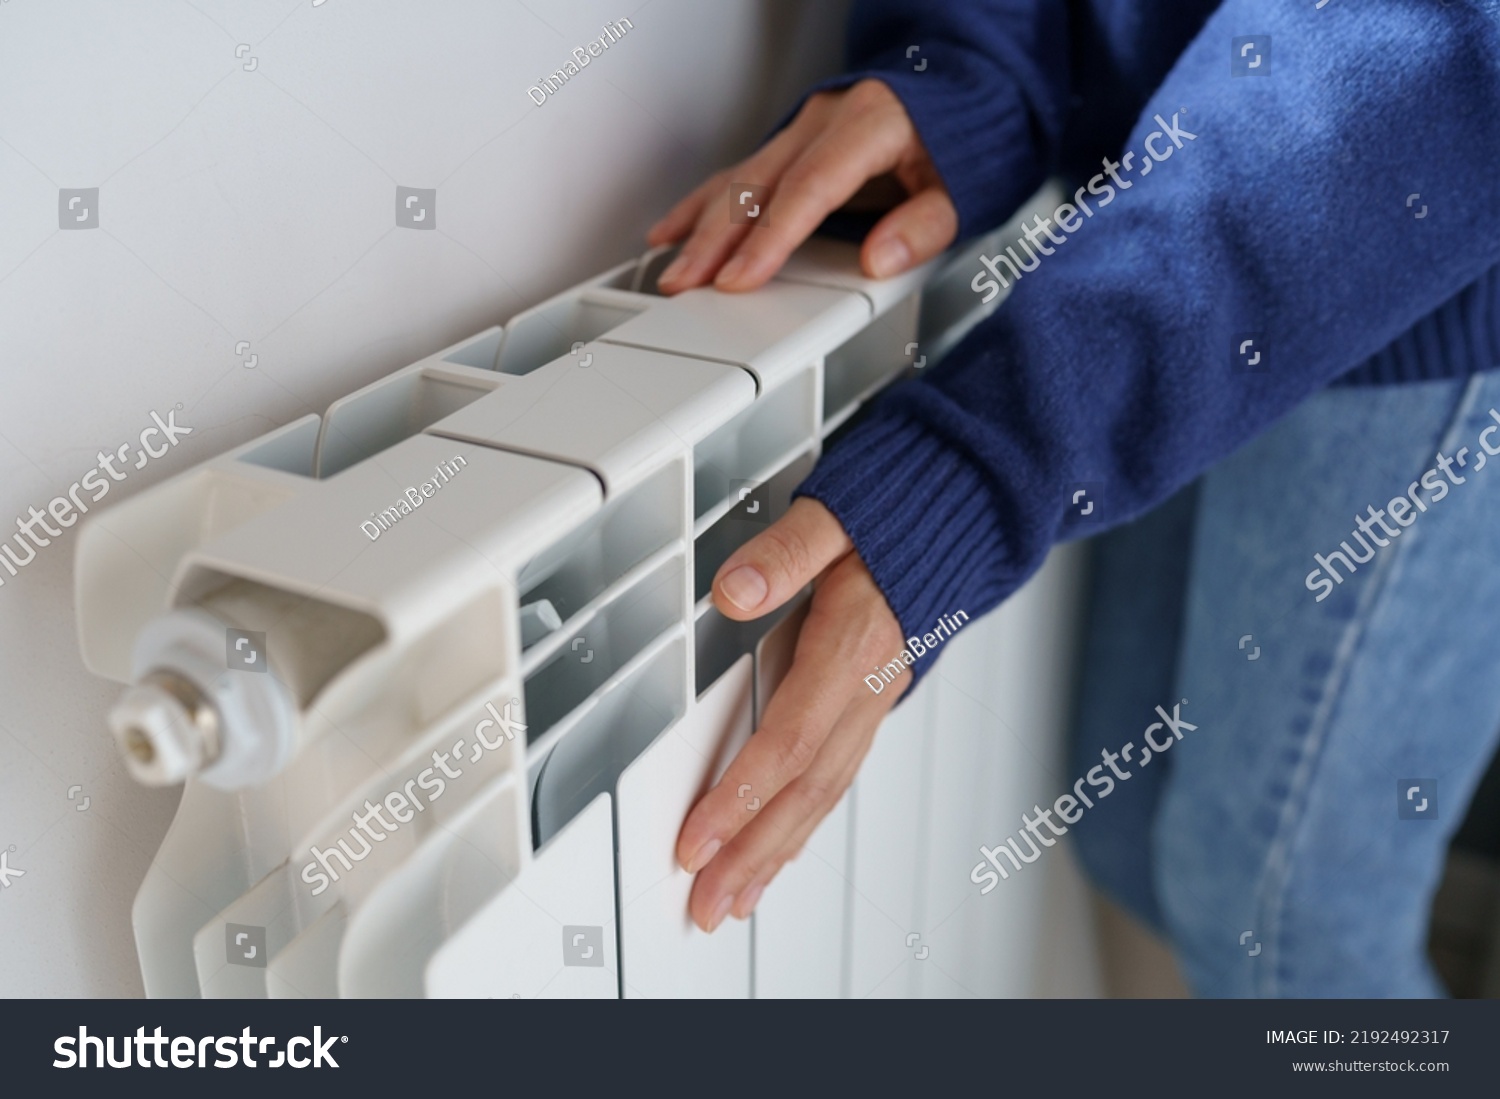 Closeup of woman warming her hands on the heater at home during cold winter days, top view. Female getting warm up her arms over radiator. Concept of heating season, cold weather.  #2192492317